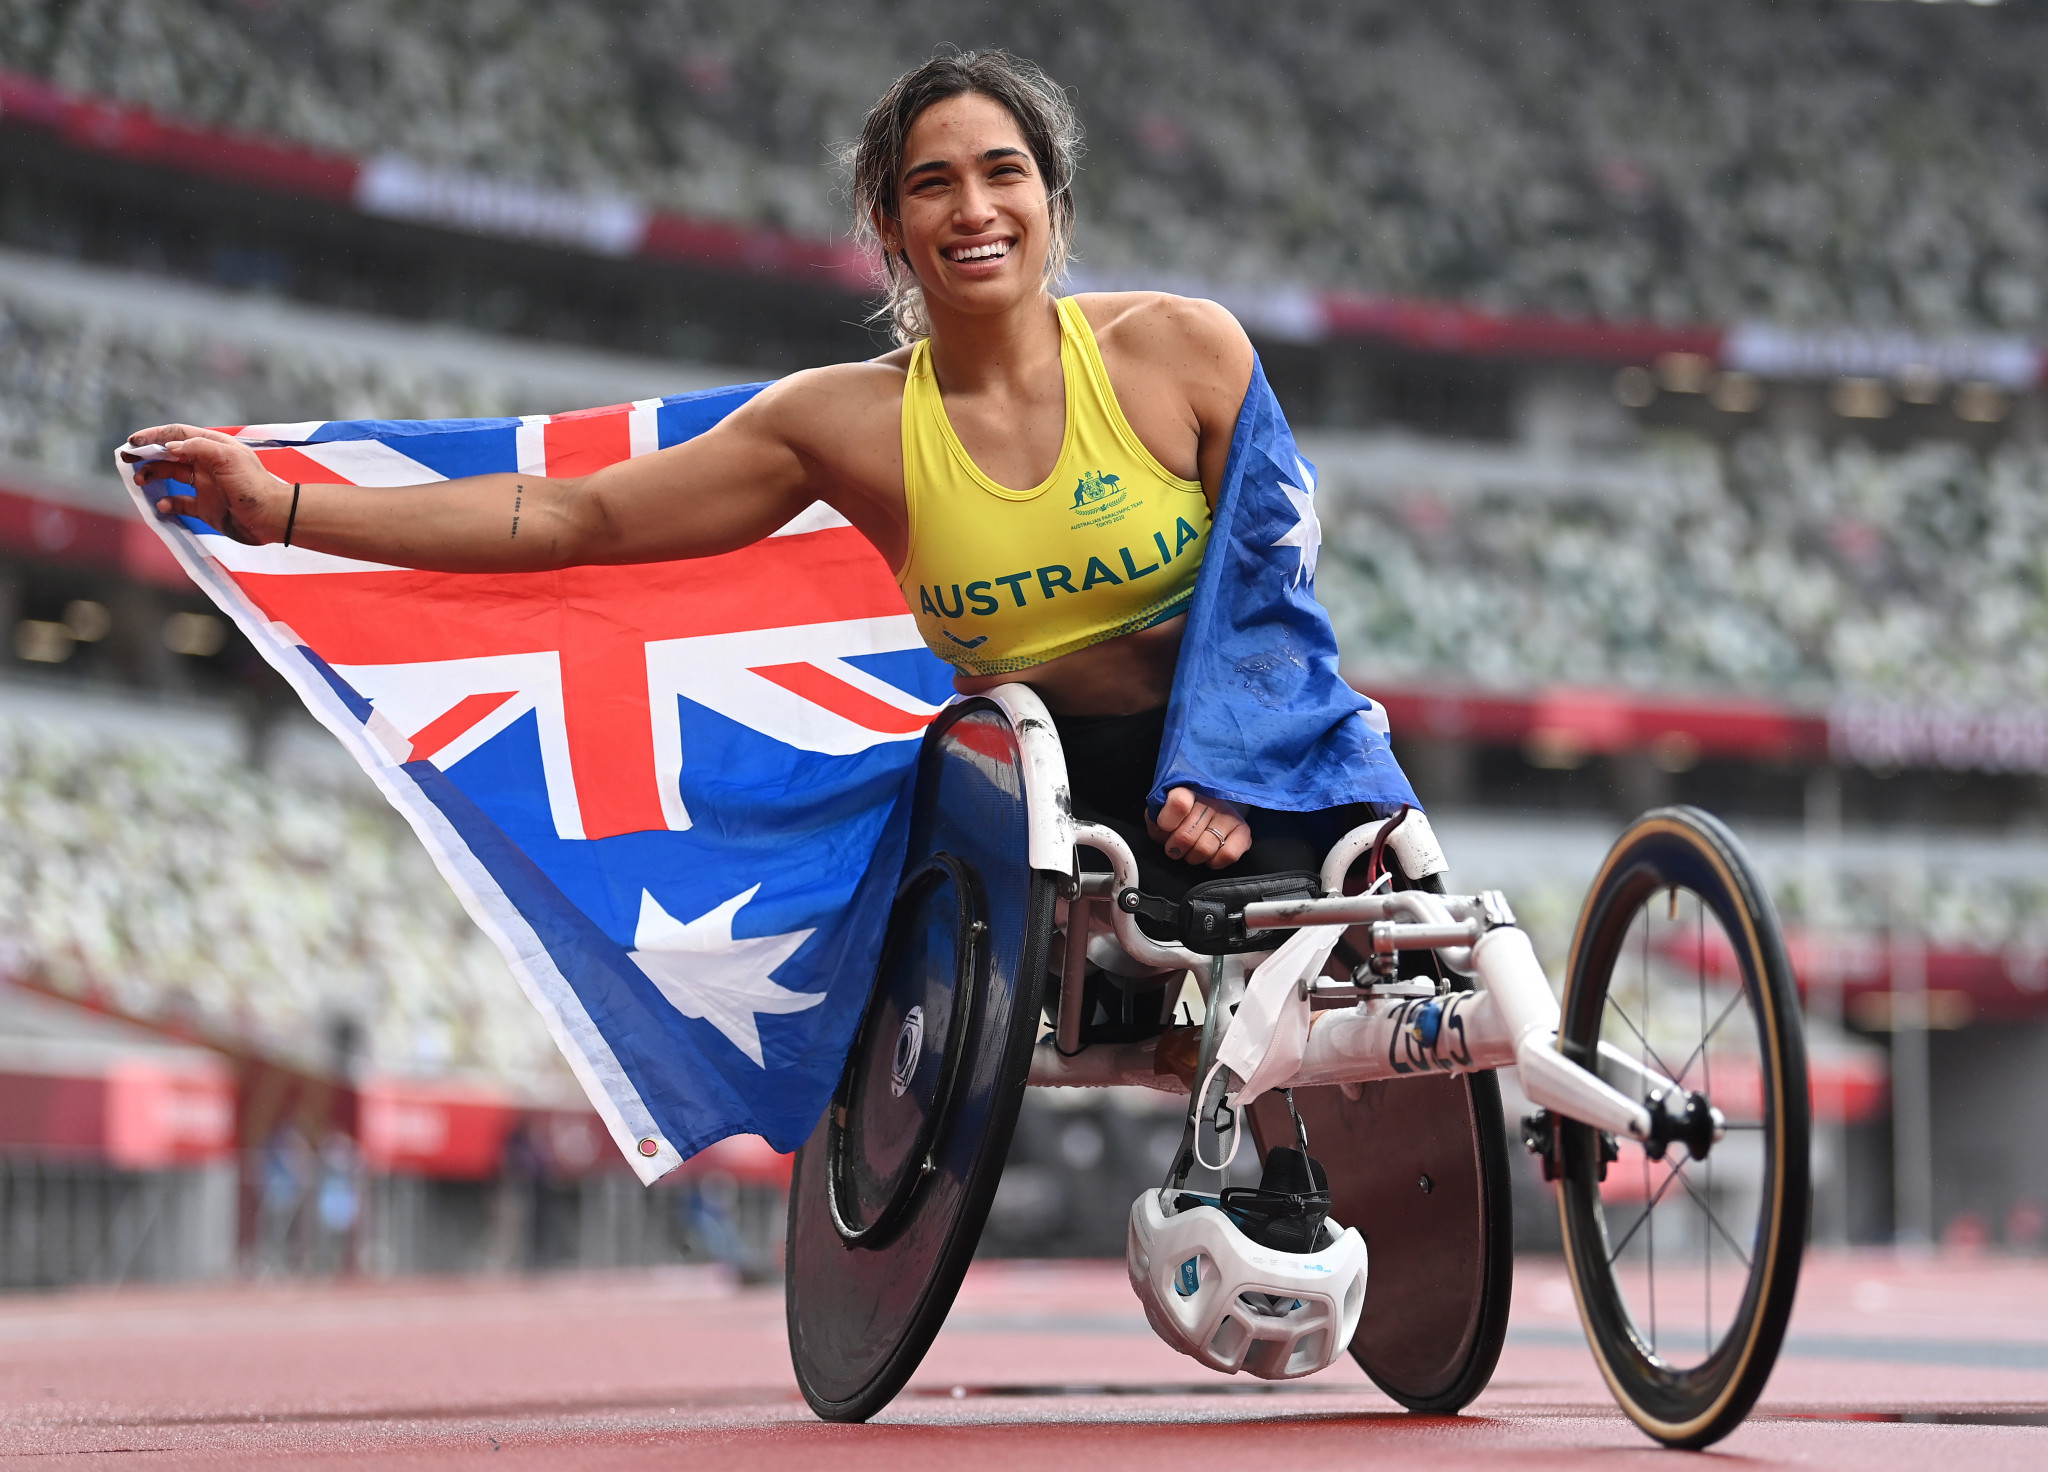 Madison de Rozario won two golds and a bronze at the Tokyo 2020 Paralympics ©Getty Images